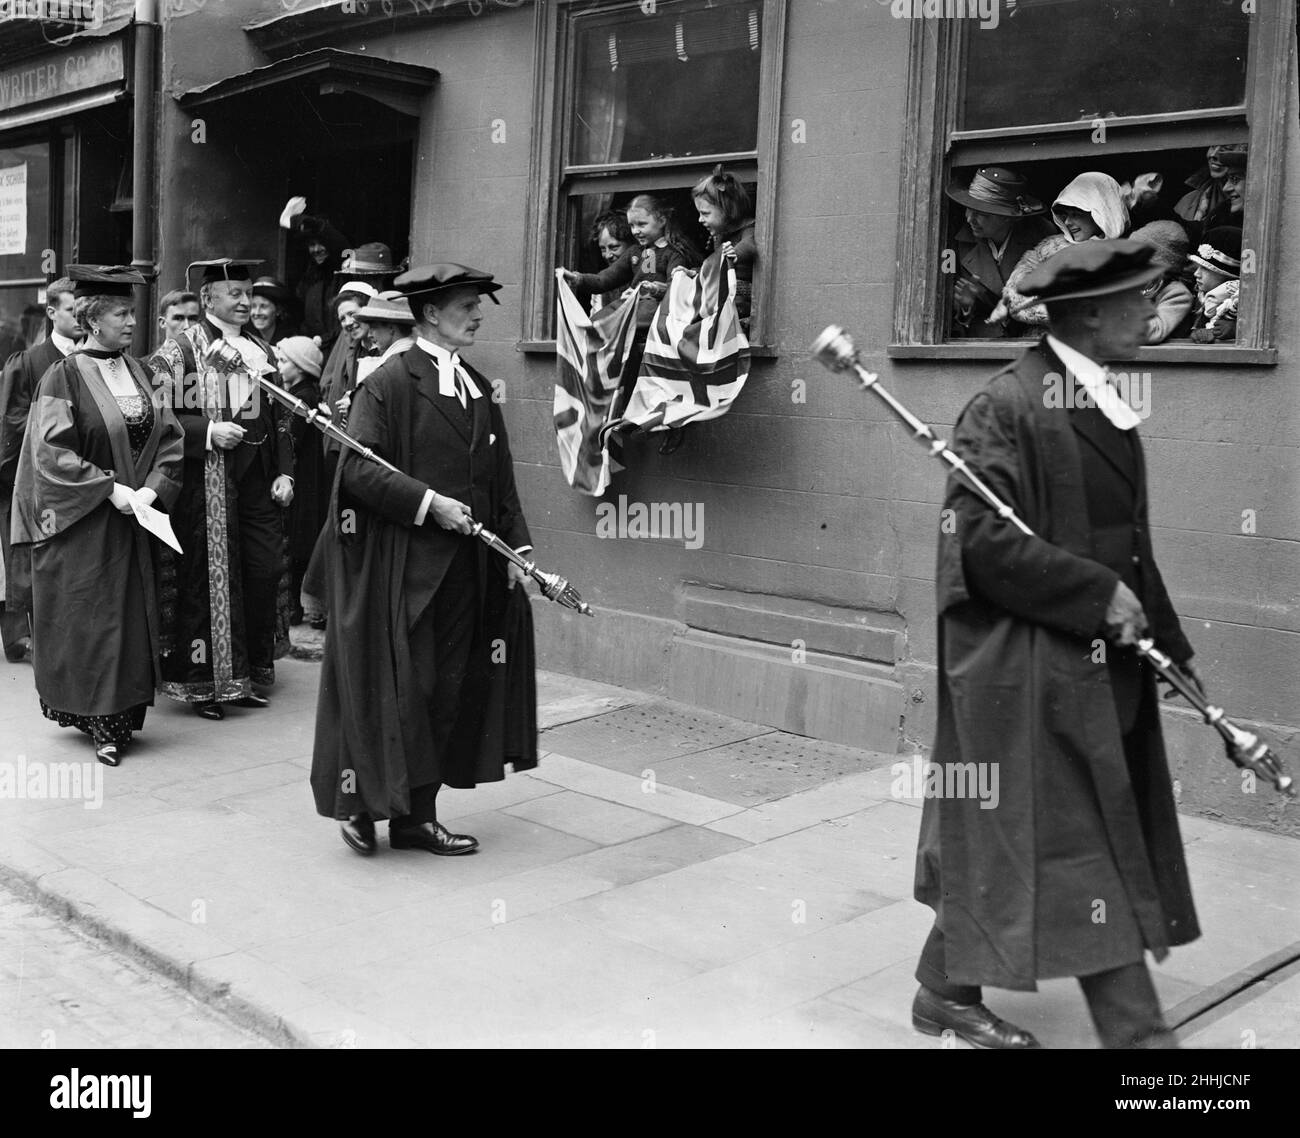 Queen Mary receives a degree of D.C.L. at Oxford University walking alongside the queen is Lord Curzon. 12th March 1921.DH9300A Stock Photo